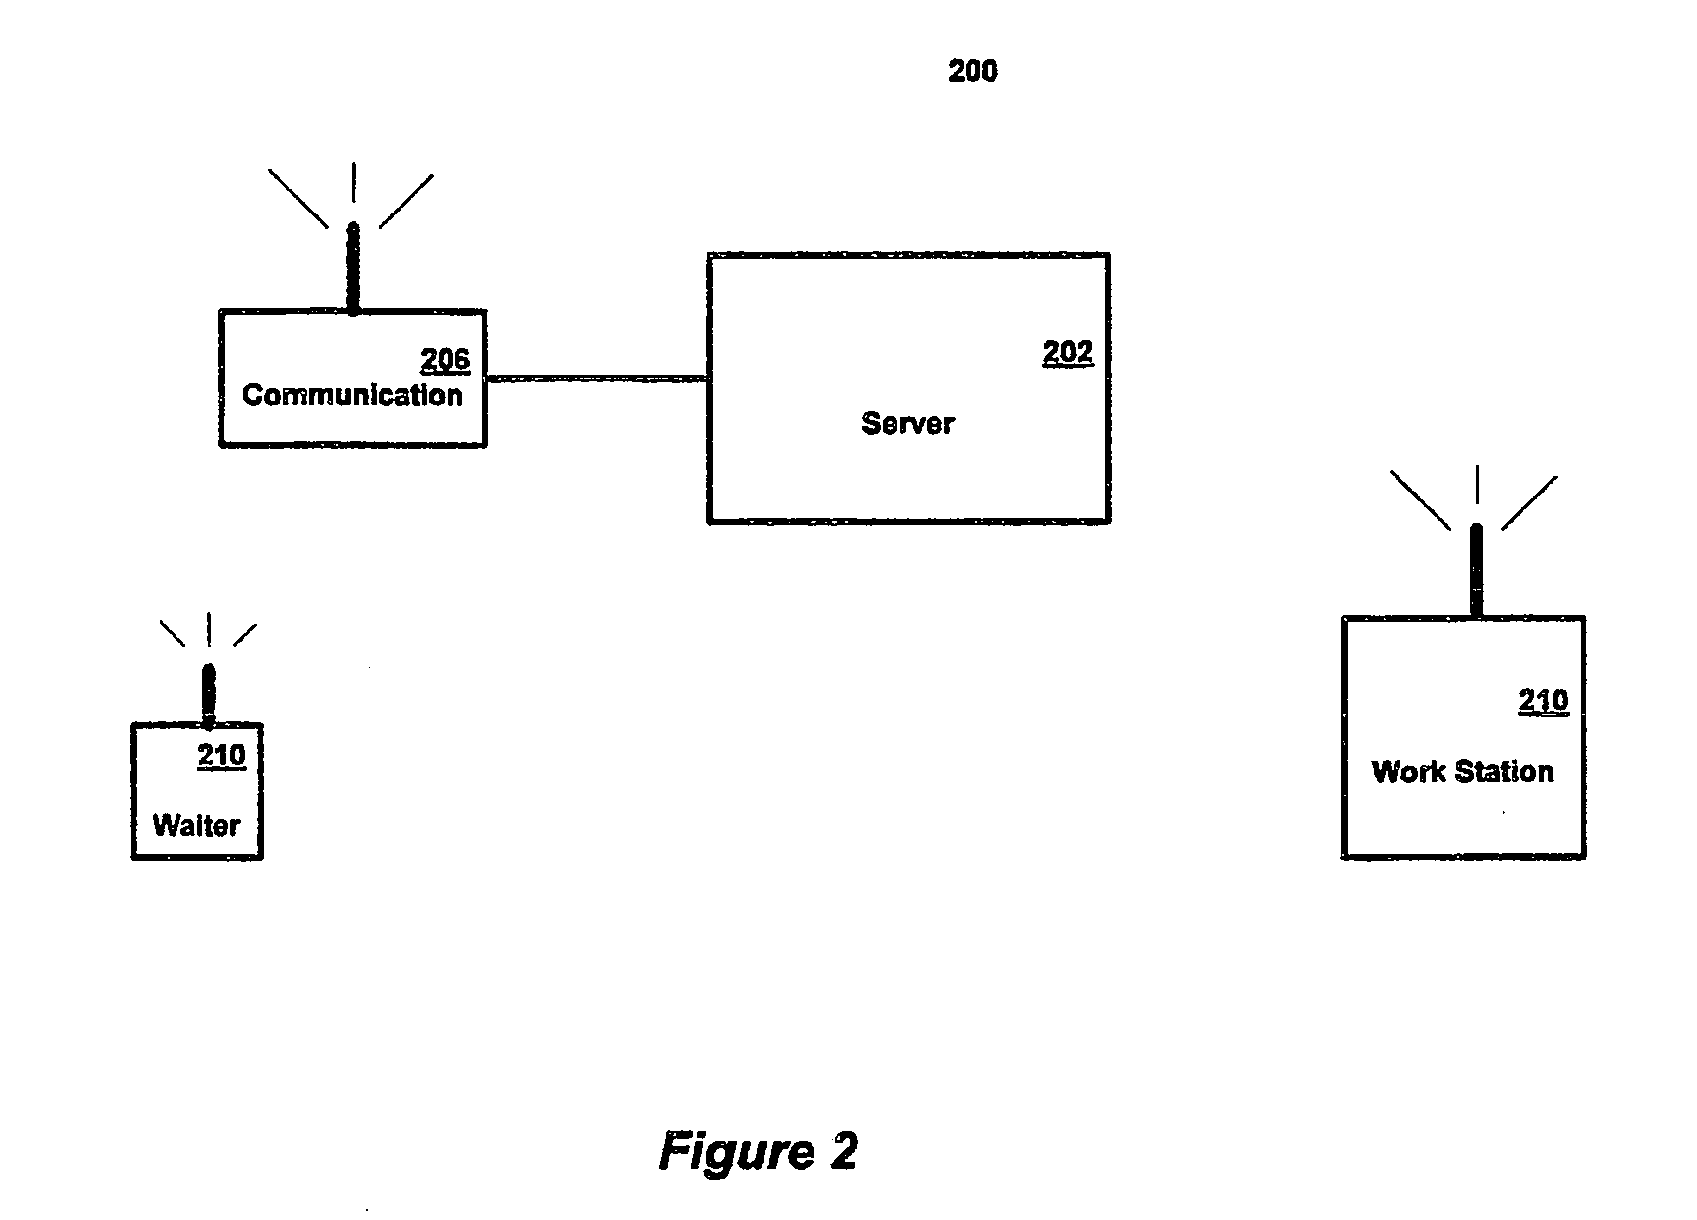 Method and apparatus for assisting vision impaired individuals with selecting items from a list